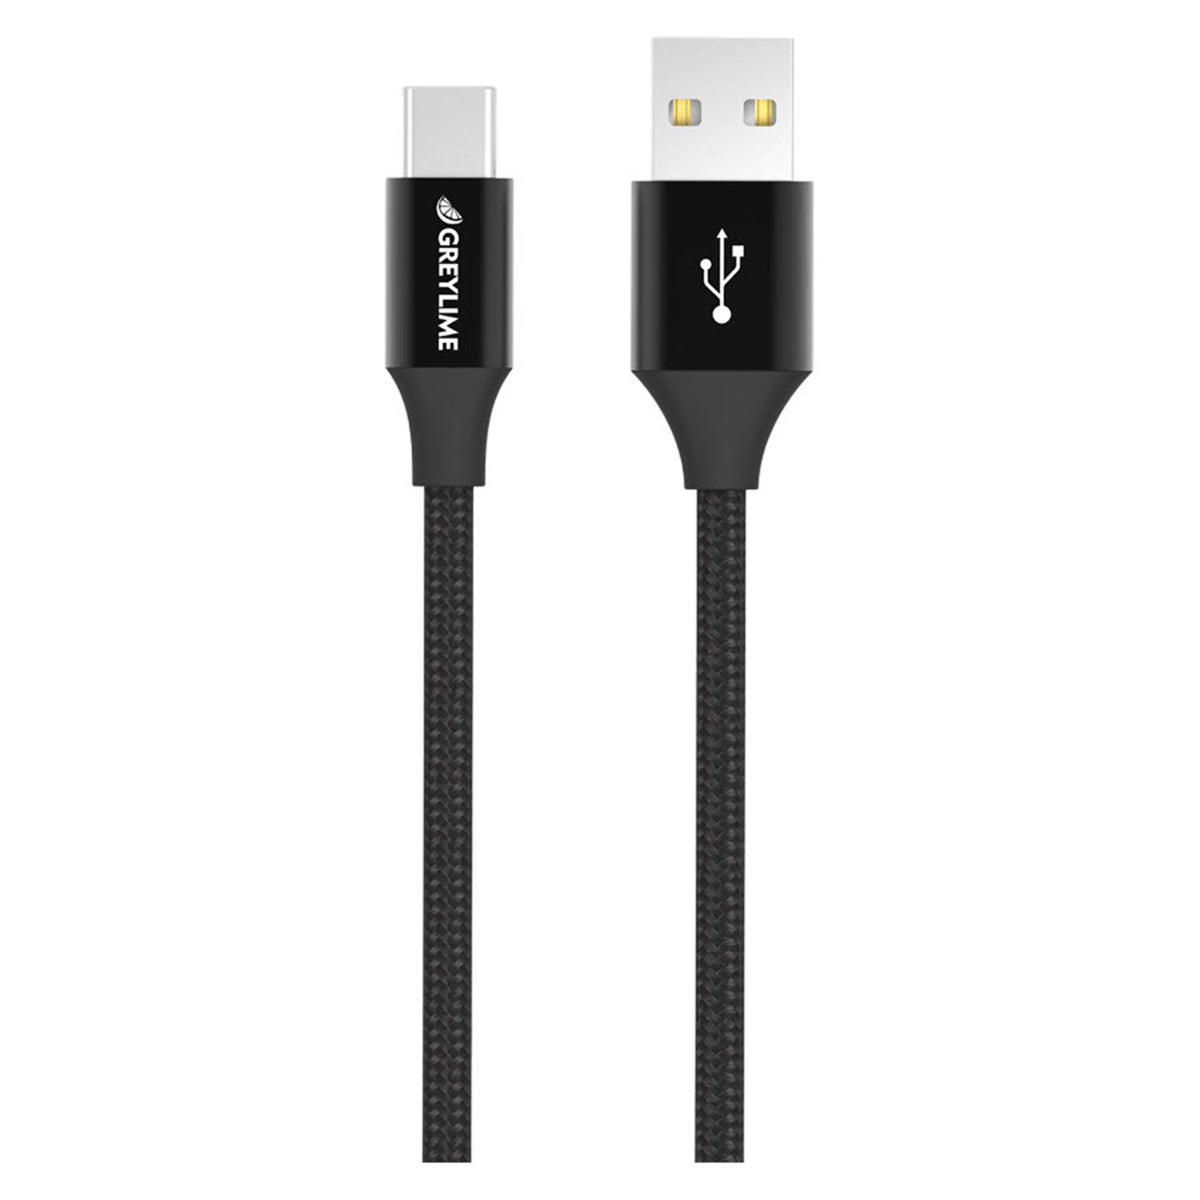 C21AC1M04-GreyLime-Braided-USB-A-to-USB-C-Cable-Sort-1-m_01.jpg